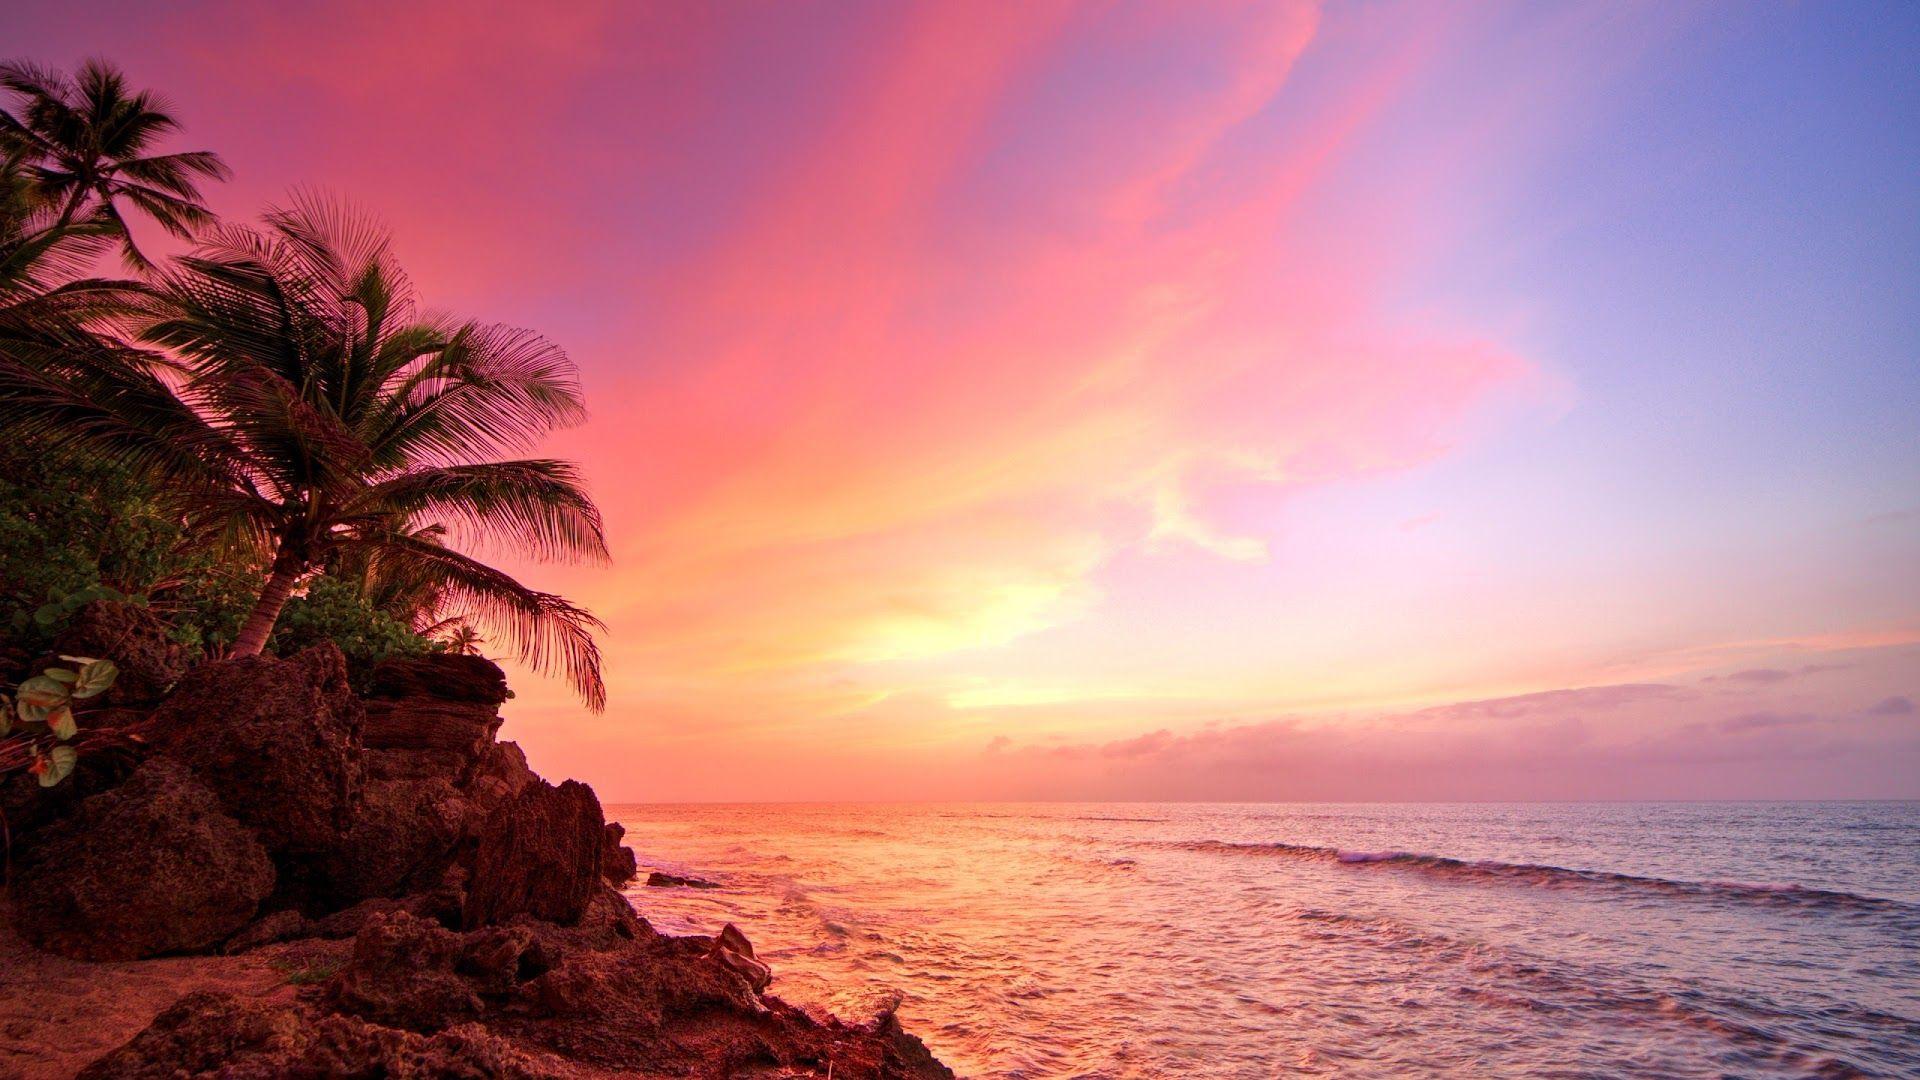 Puerto Rico Beach Sunset Wallpapers Top Free Puerto Rico Beach Sunset